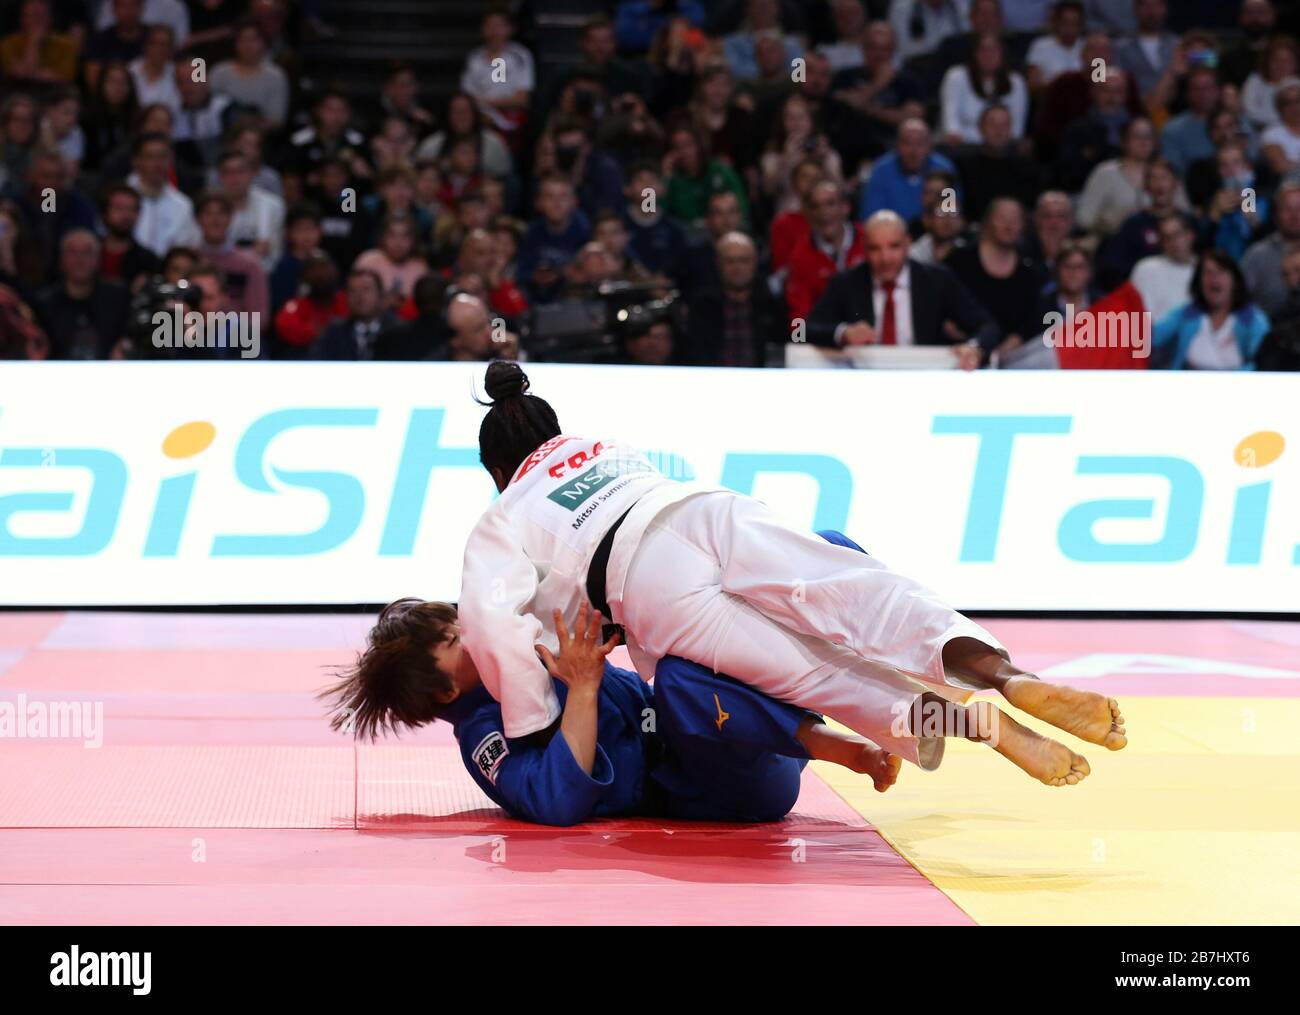 Paris, France - 08th Feb, 2020: Clarisse Agbegnenou for France against Nami Nabekura for Japan, Women's -63 kg, Gold Medal Match (Credit: Mickael Chavet) Stock Photo